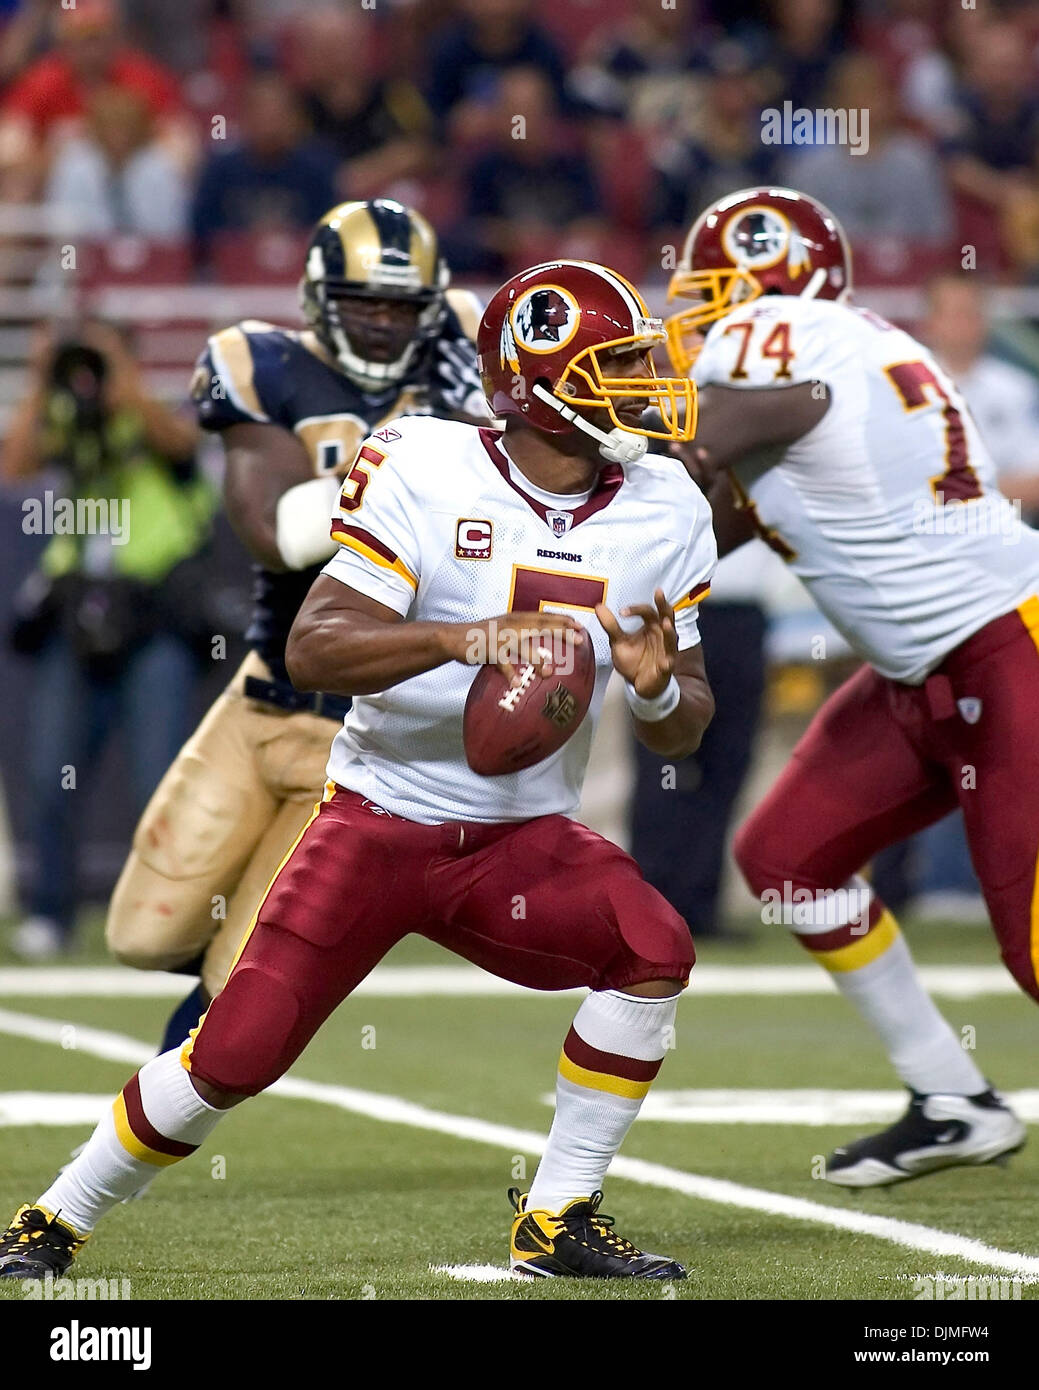 Sep 26, 2010 - St Louis, Missouri, U.S. - Washington quarterback DONOVAN MCNABB (5) sets up to pass in the game between the St. Louis Rams and the Washington Redskins at the Edward Jones Dome. The Rams defeated the Redskins 30 to 16. (Credit Image: © Mike Granse/ZUMApress.com) Stock Photo